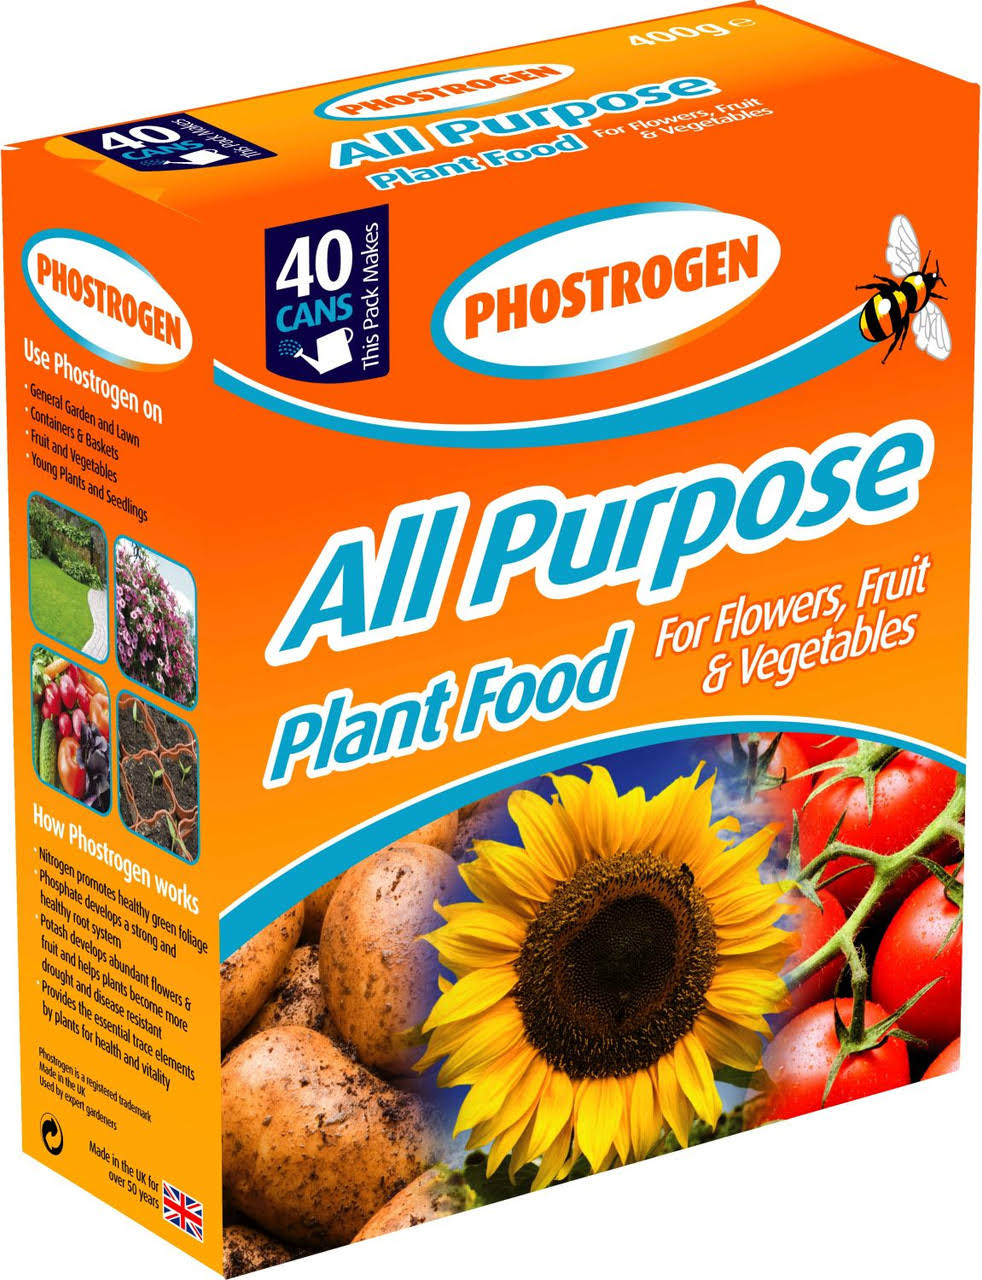 Phostrogen All Purpose Plant Food - 40 Cans